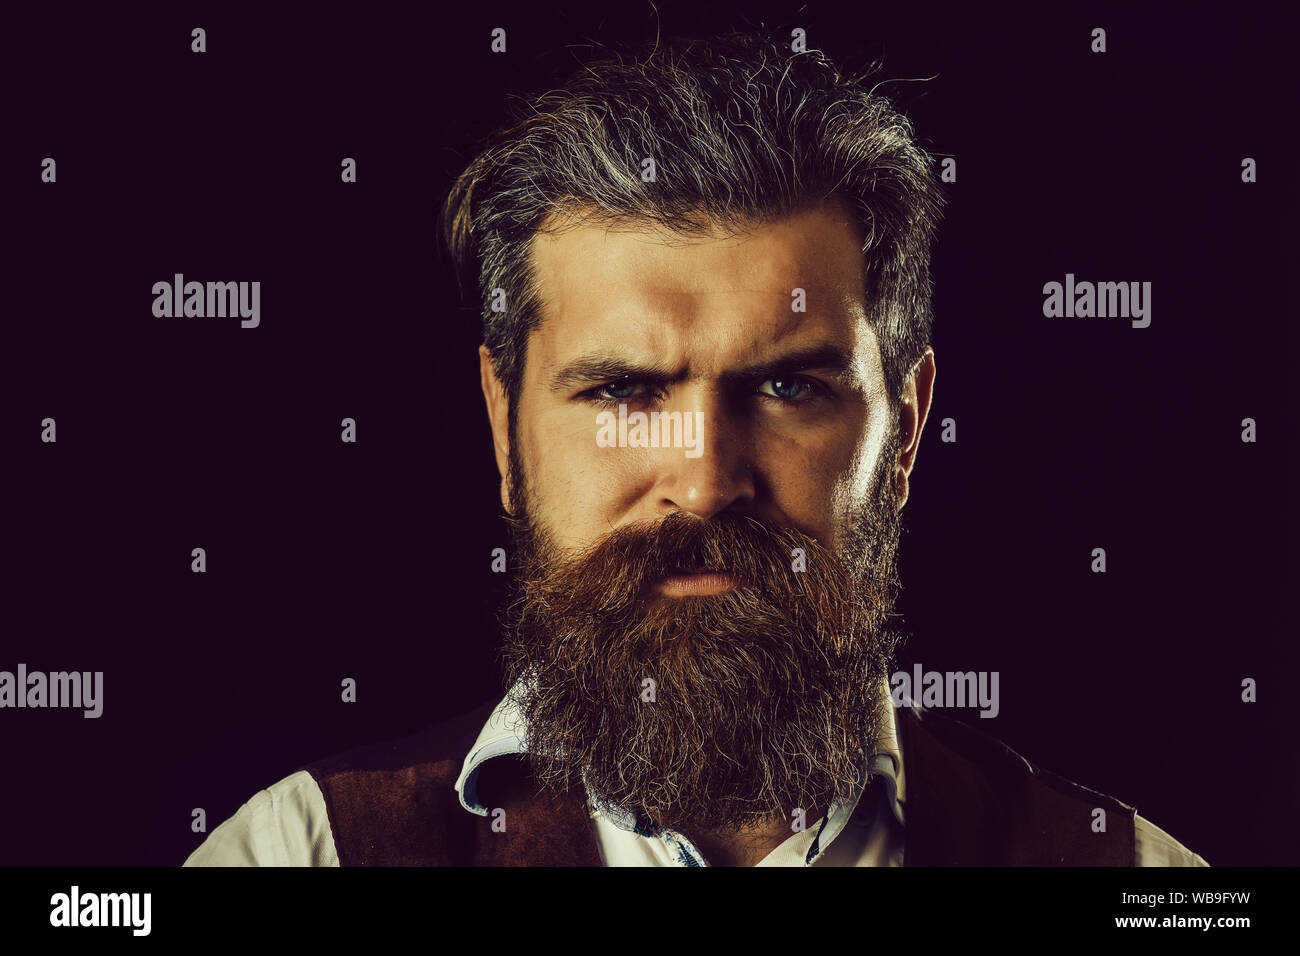 Man With Long Beard Moustache And Grey Hair Bearded Hipster With